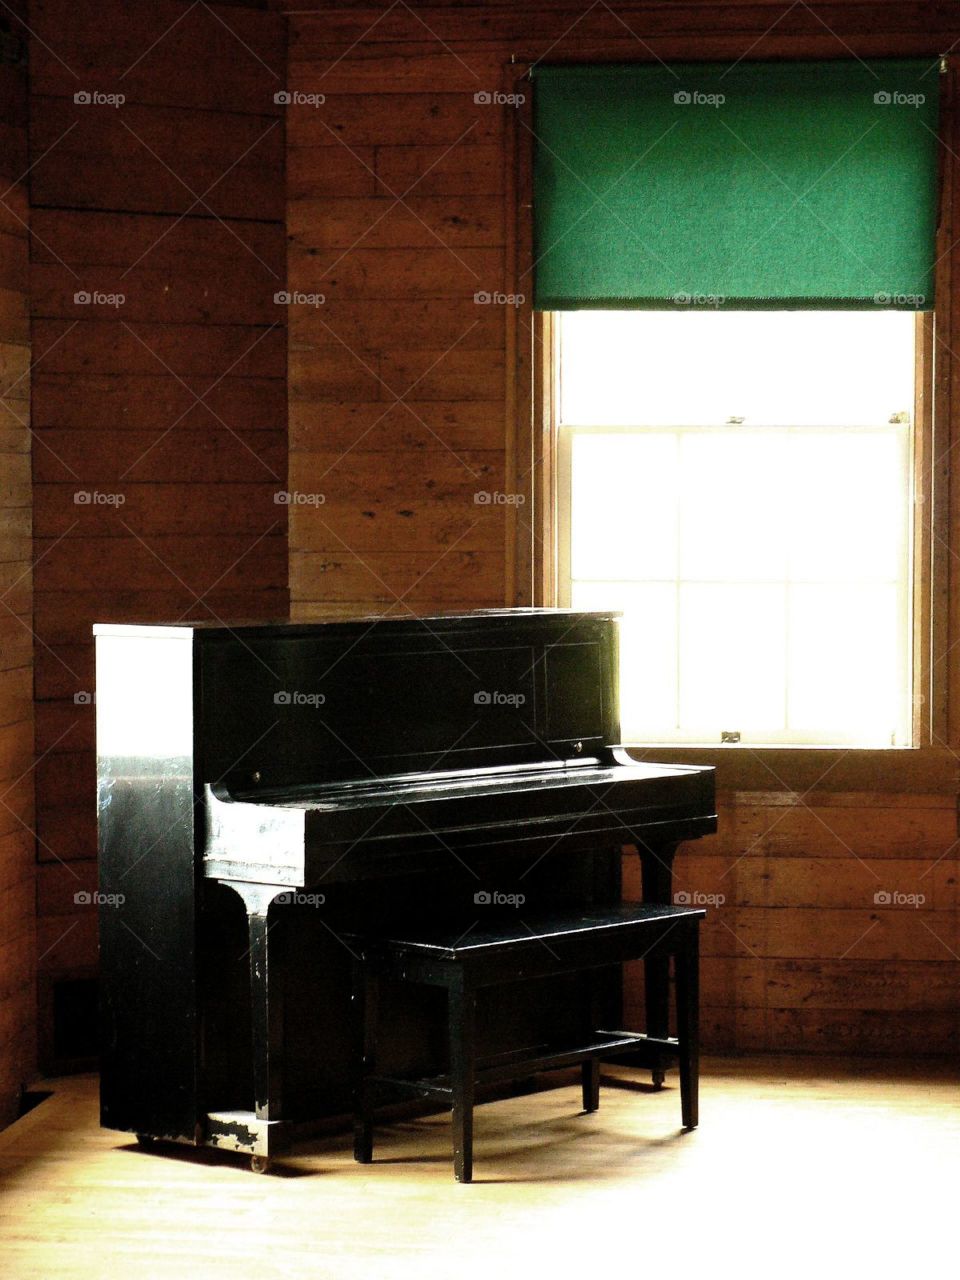 Black piano . A single upright piano stands alone against a green shaded window